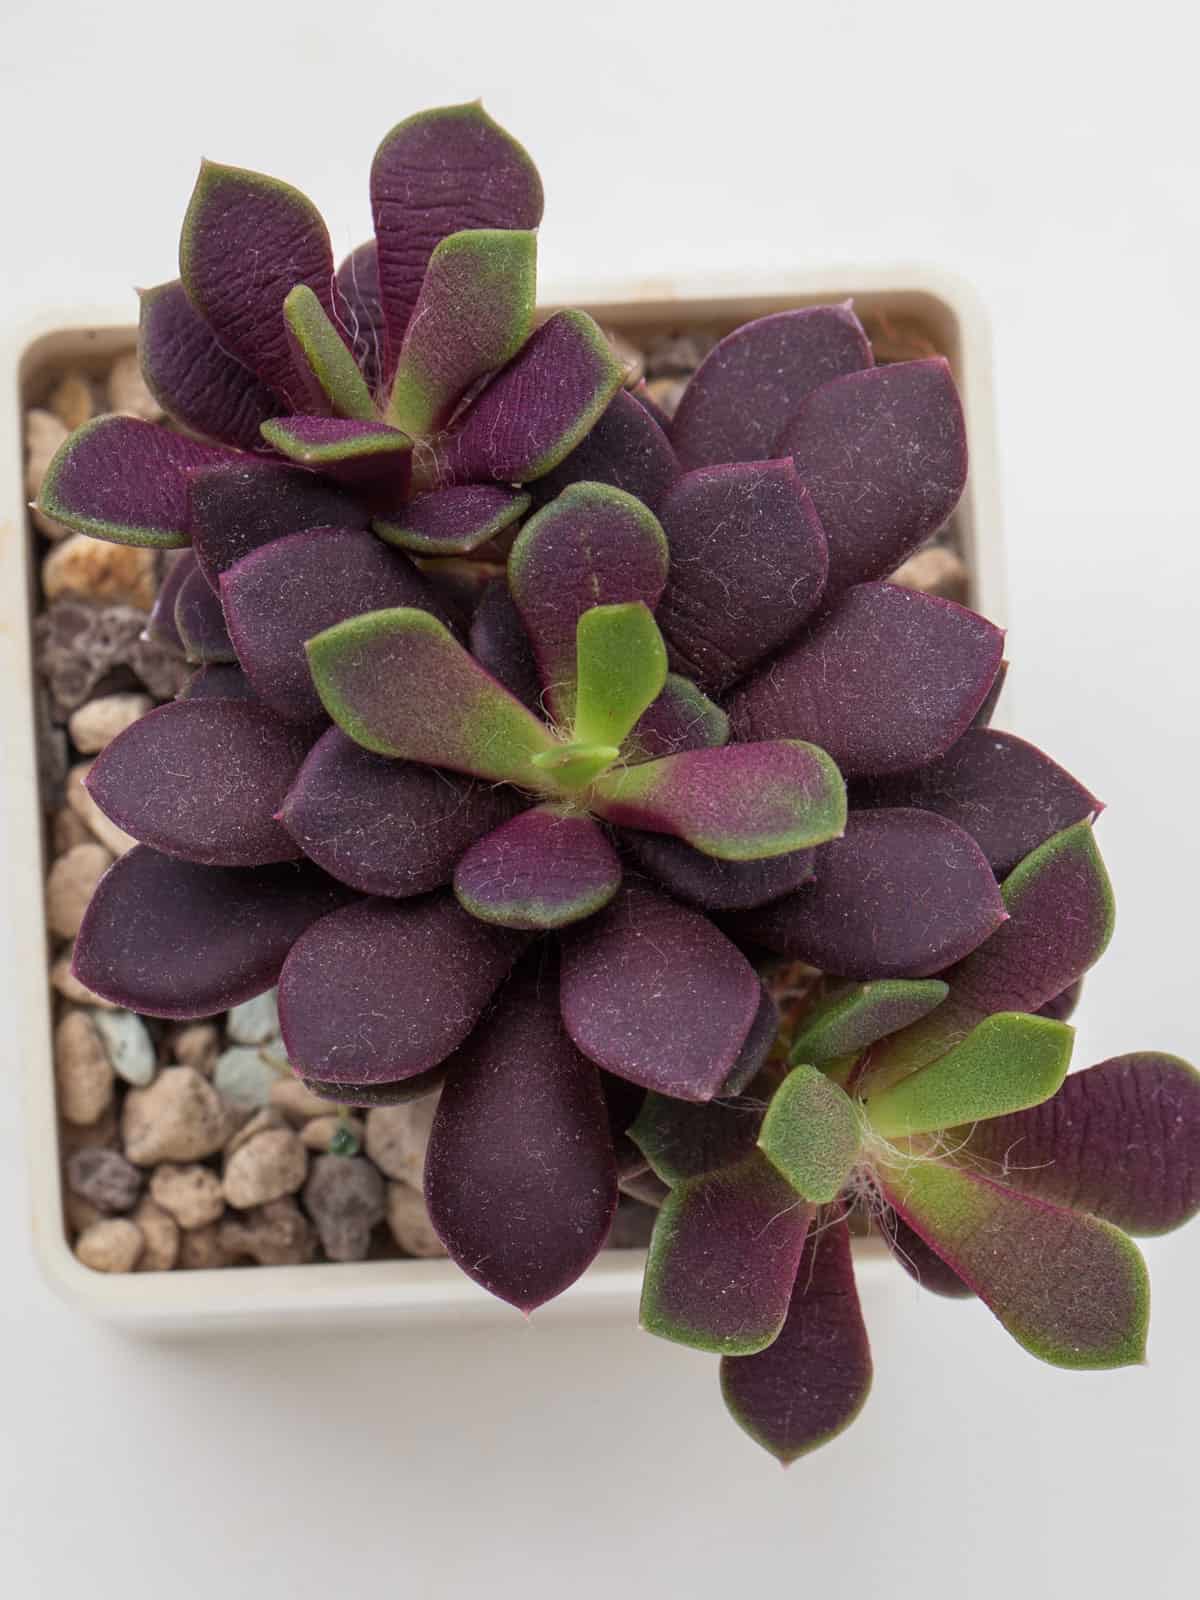 Gorgeous purple to green tip of a Anacampseros Rufescens 'Sunrise succulent'